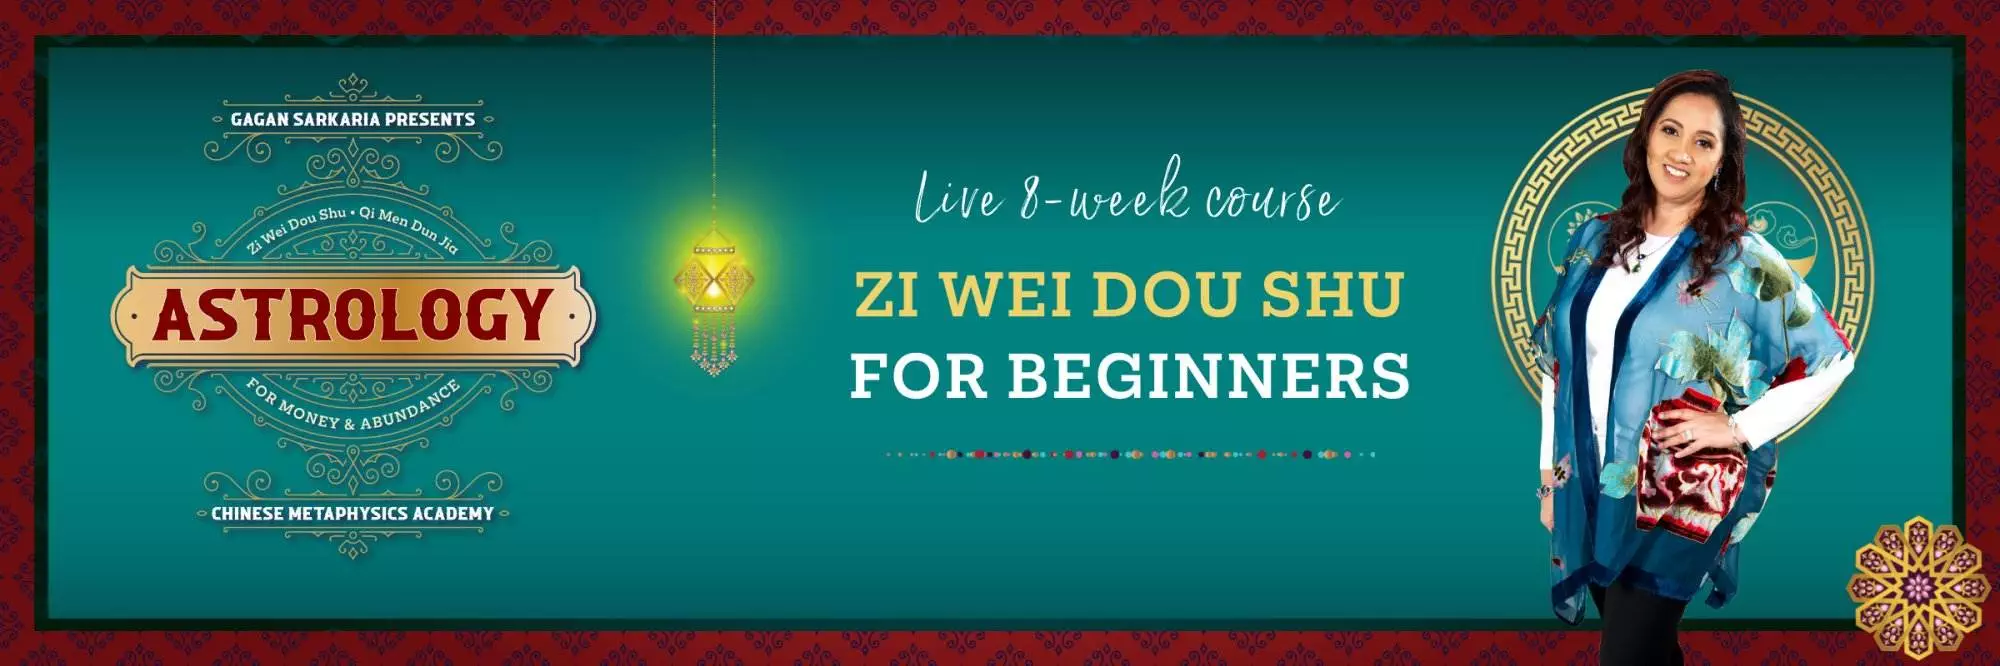 Beginners course on Chinese astrology, focusing on zi wei dou shu and zwds astrology.